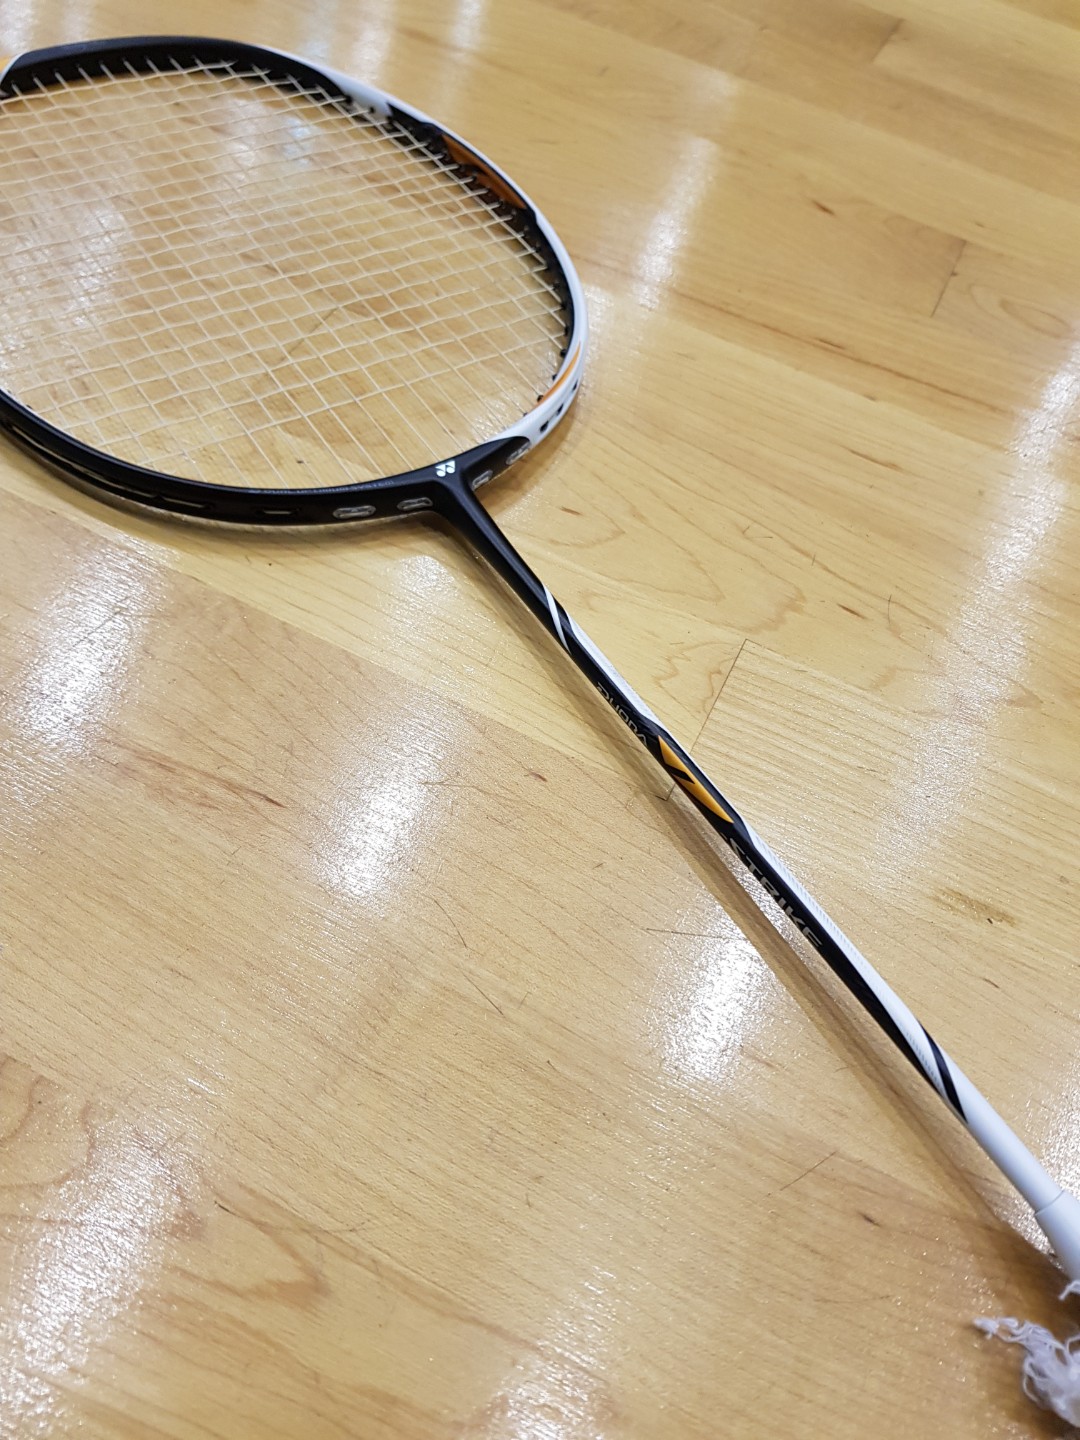 Made in Japan Yonex Duora Z Strike 3U Badminton Racket with stringing and cover 